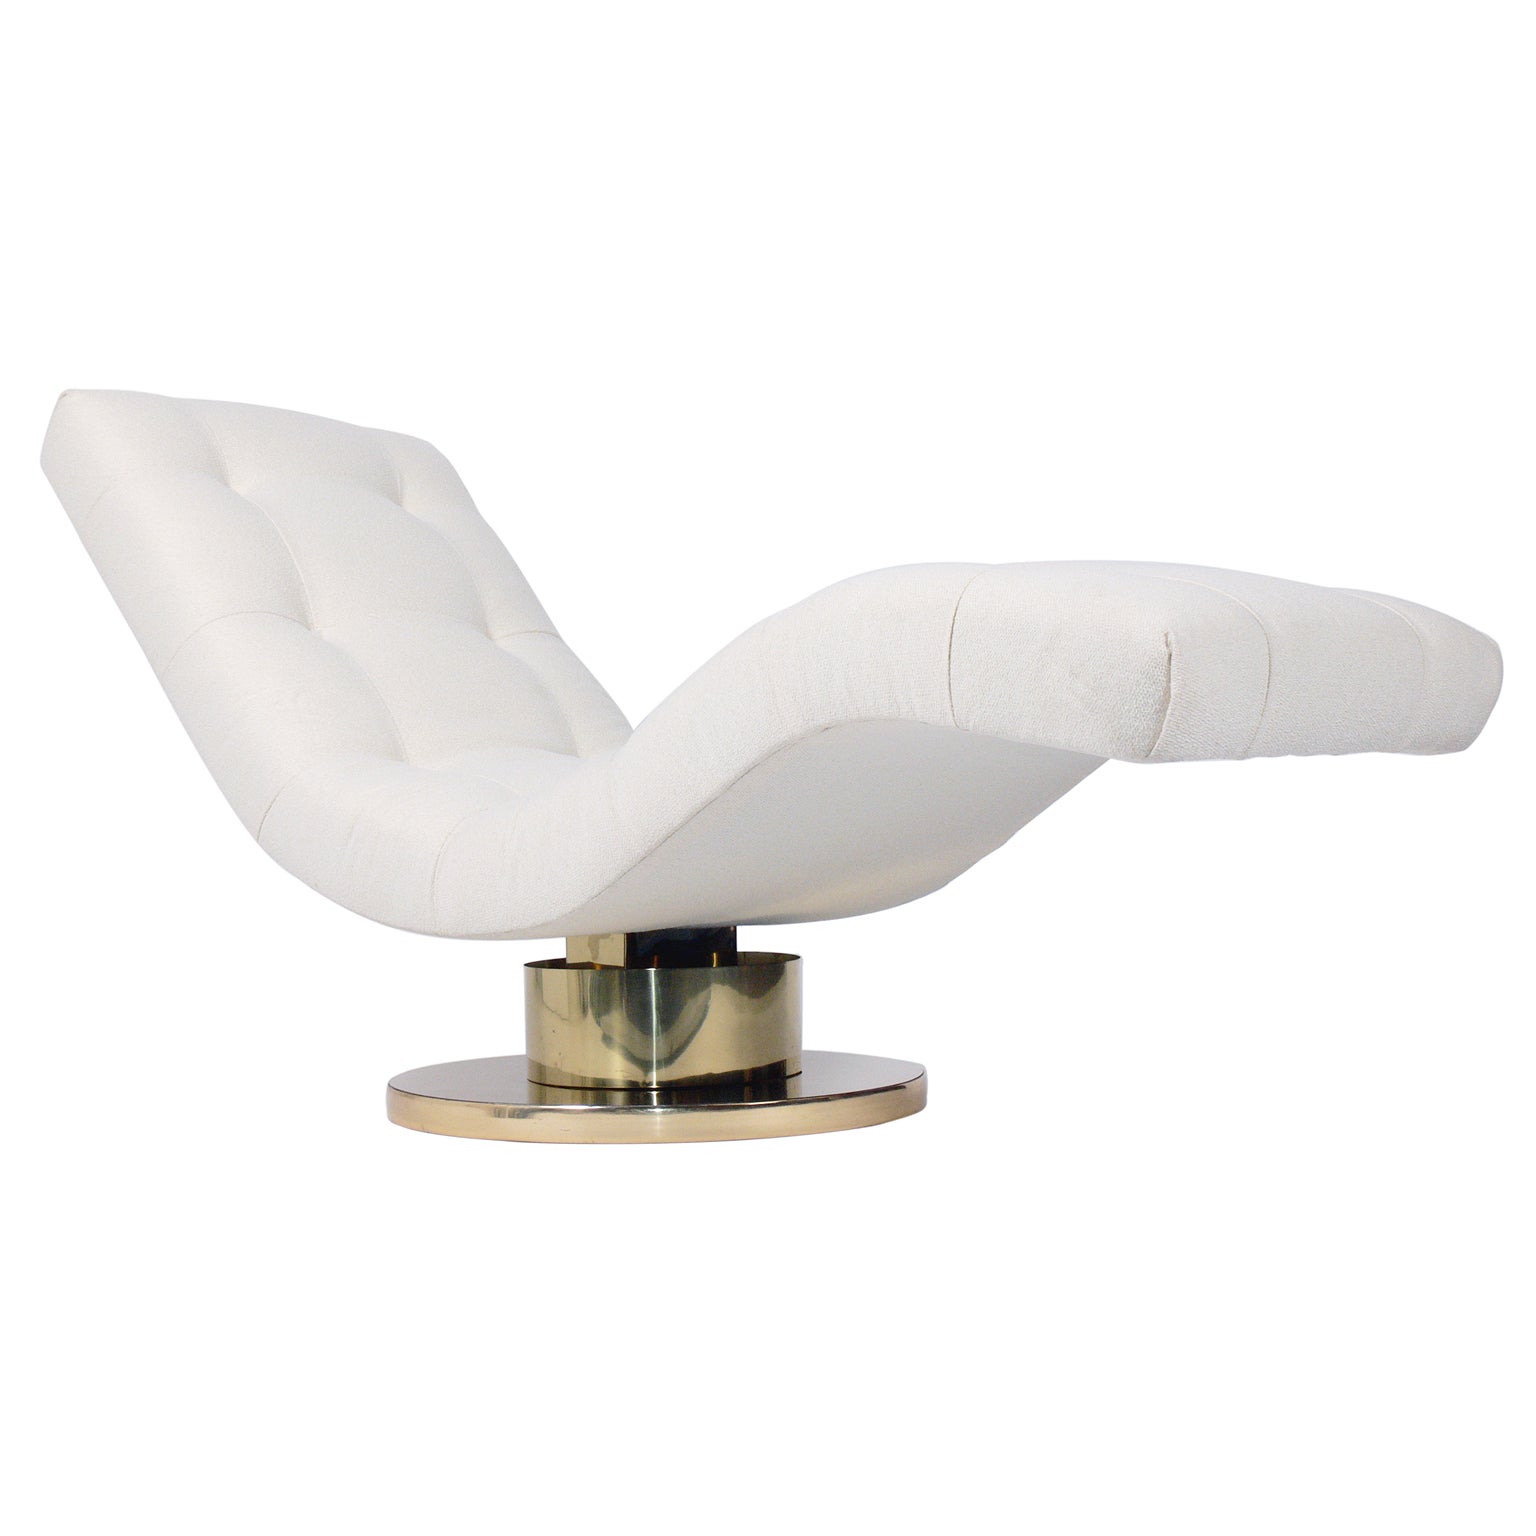 Modernist Chaise Lounge by Milo Baughman